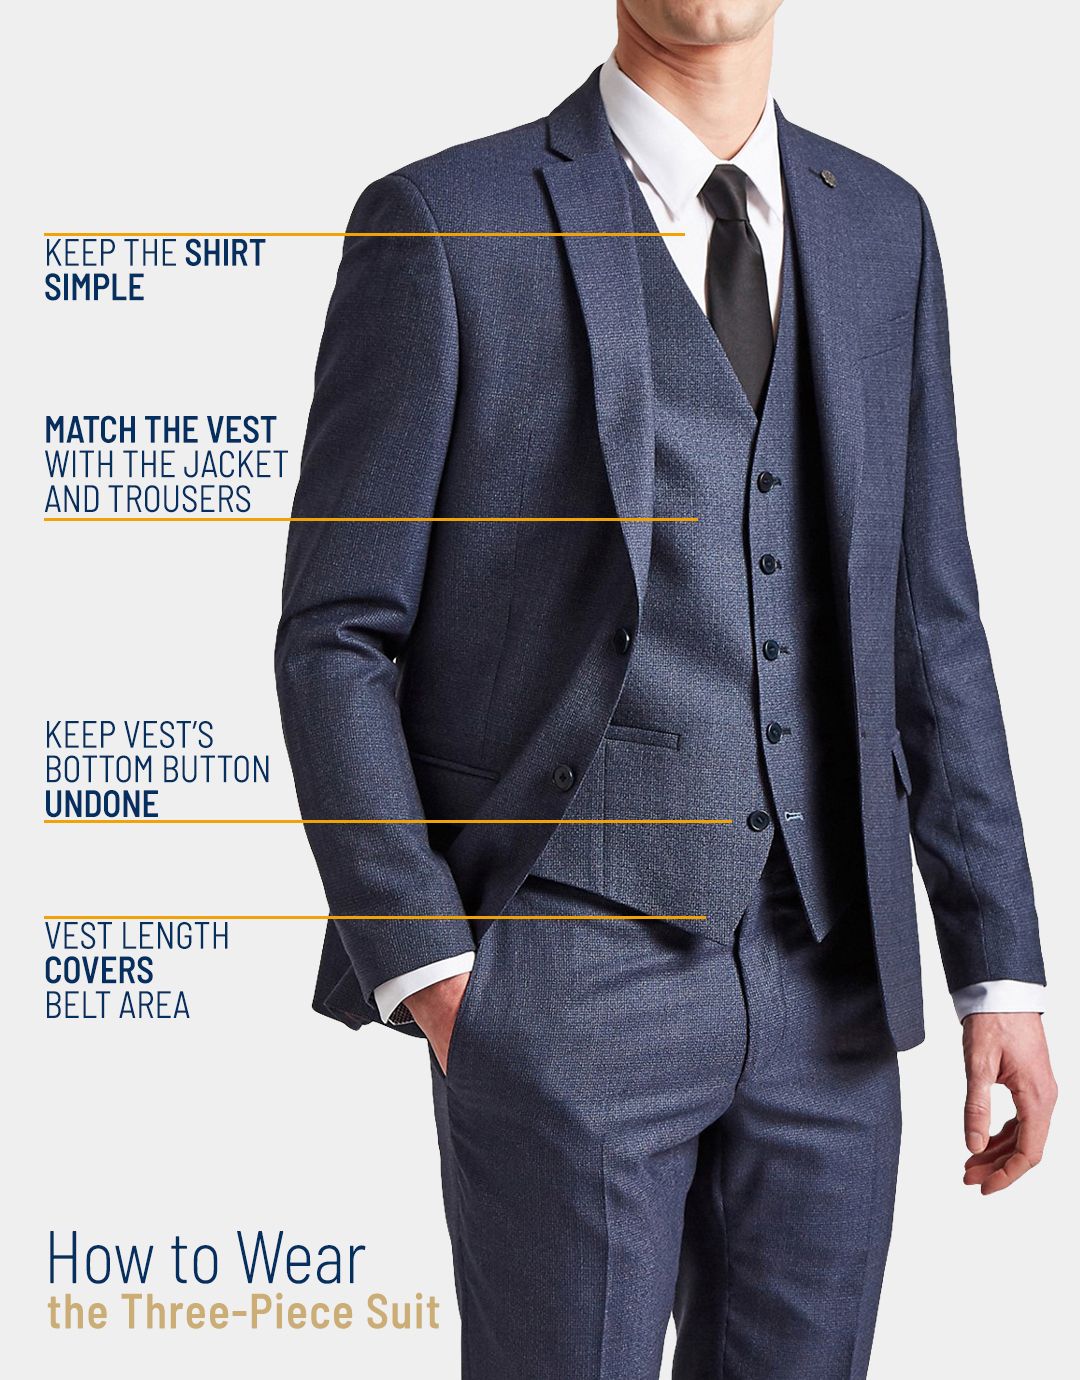 Basic rules on how to wear a three-piece suit